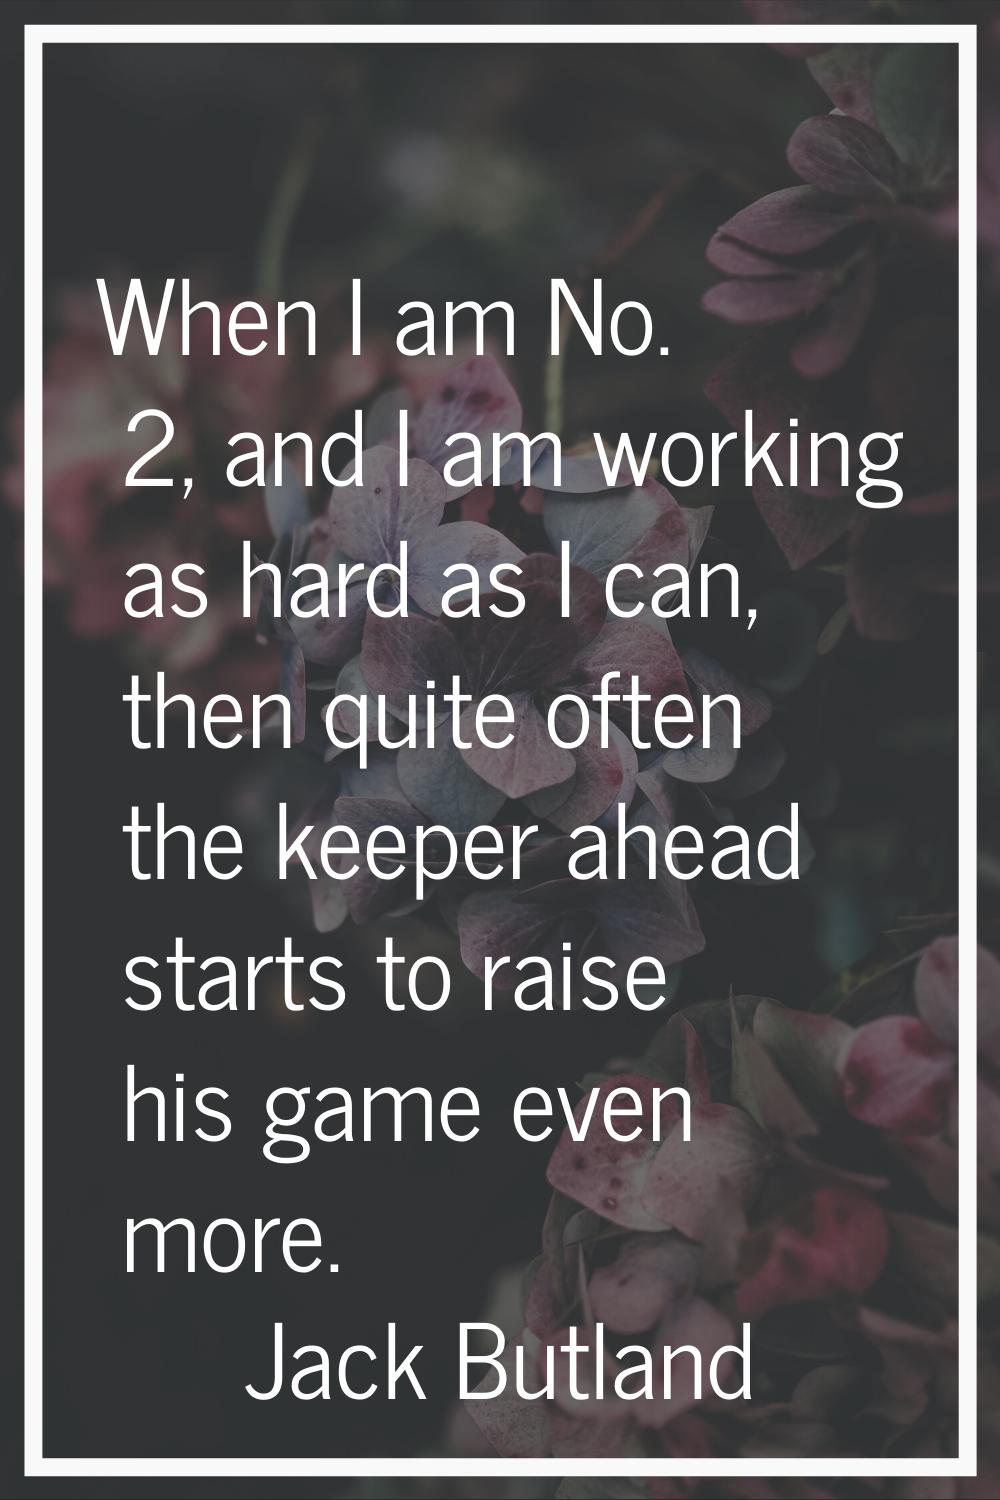 When I am No. 2, and I am working as hard as I can, then quite often the keeper ahead starts to rai